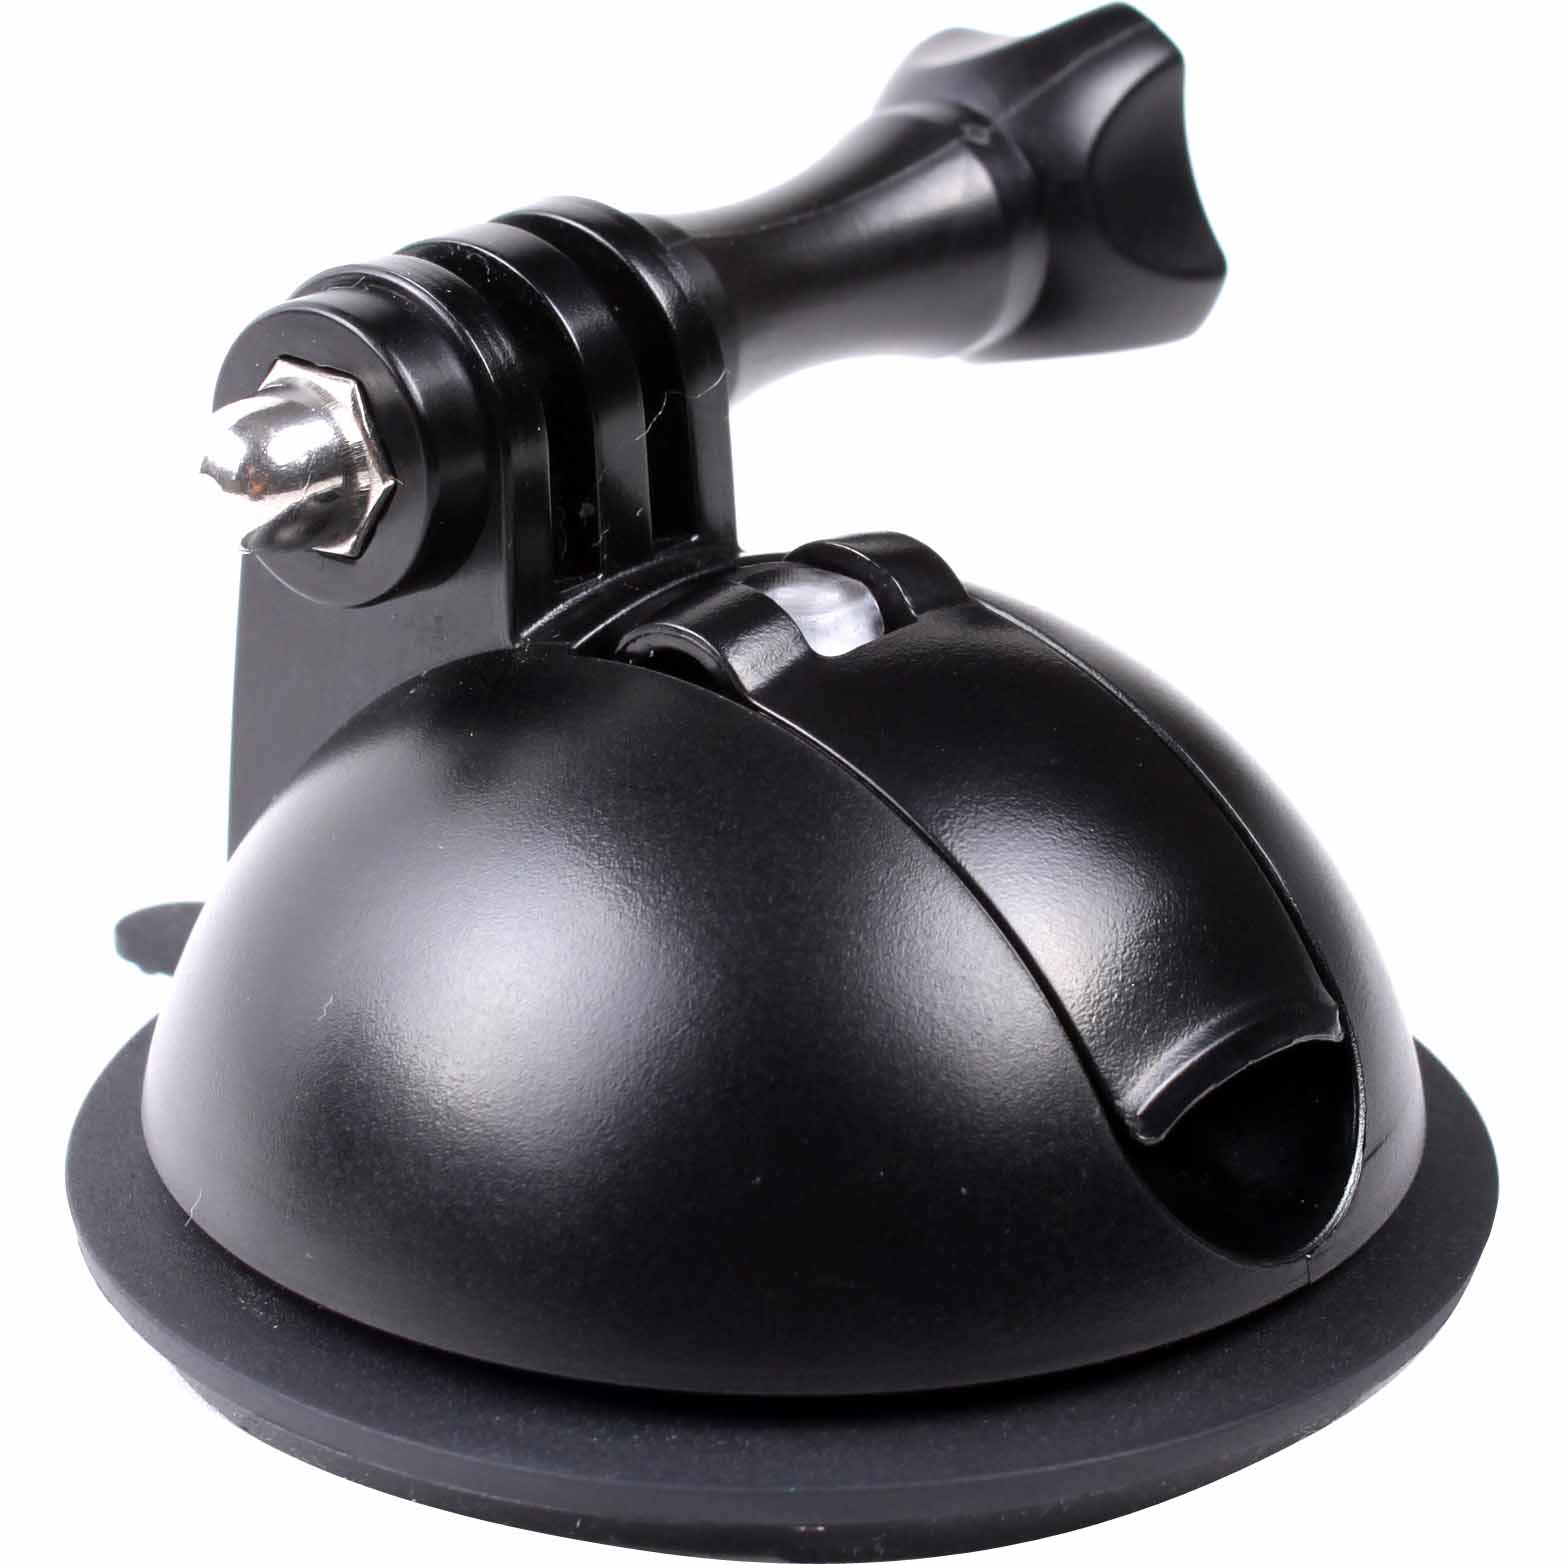 ACTIVEON AM05A Universal Suction Mount